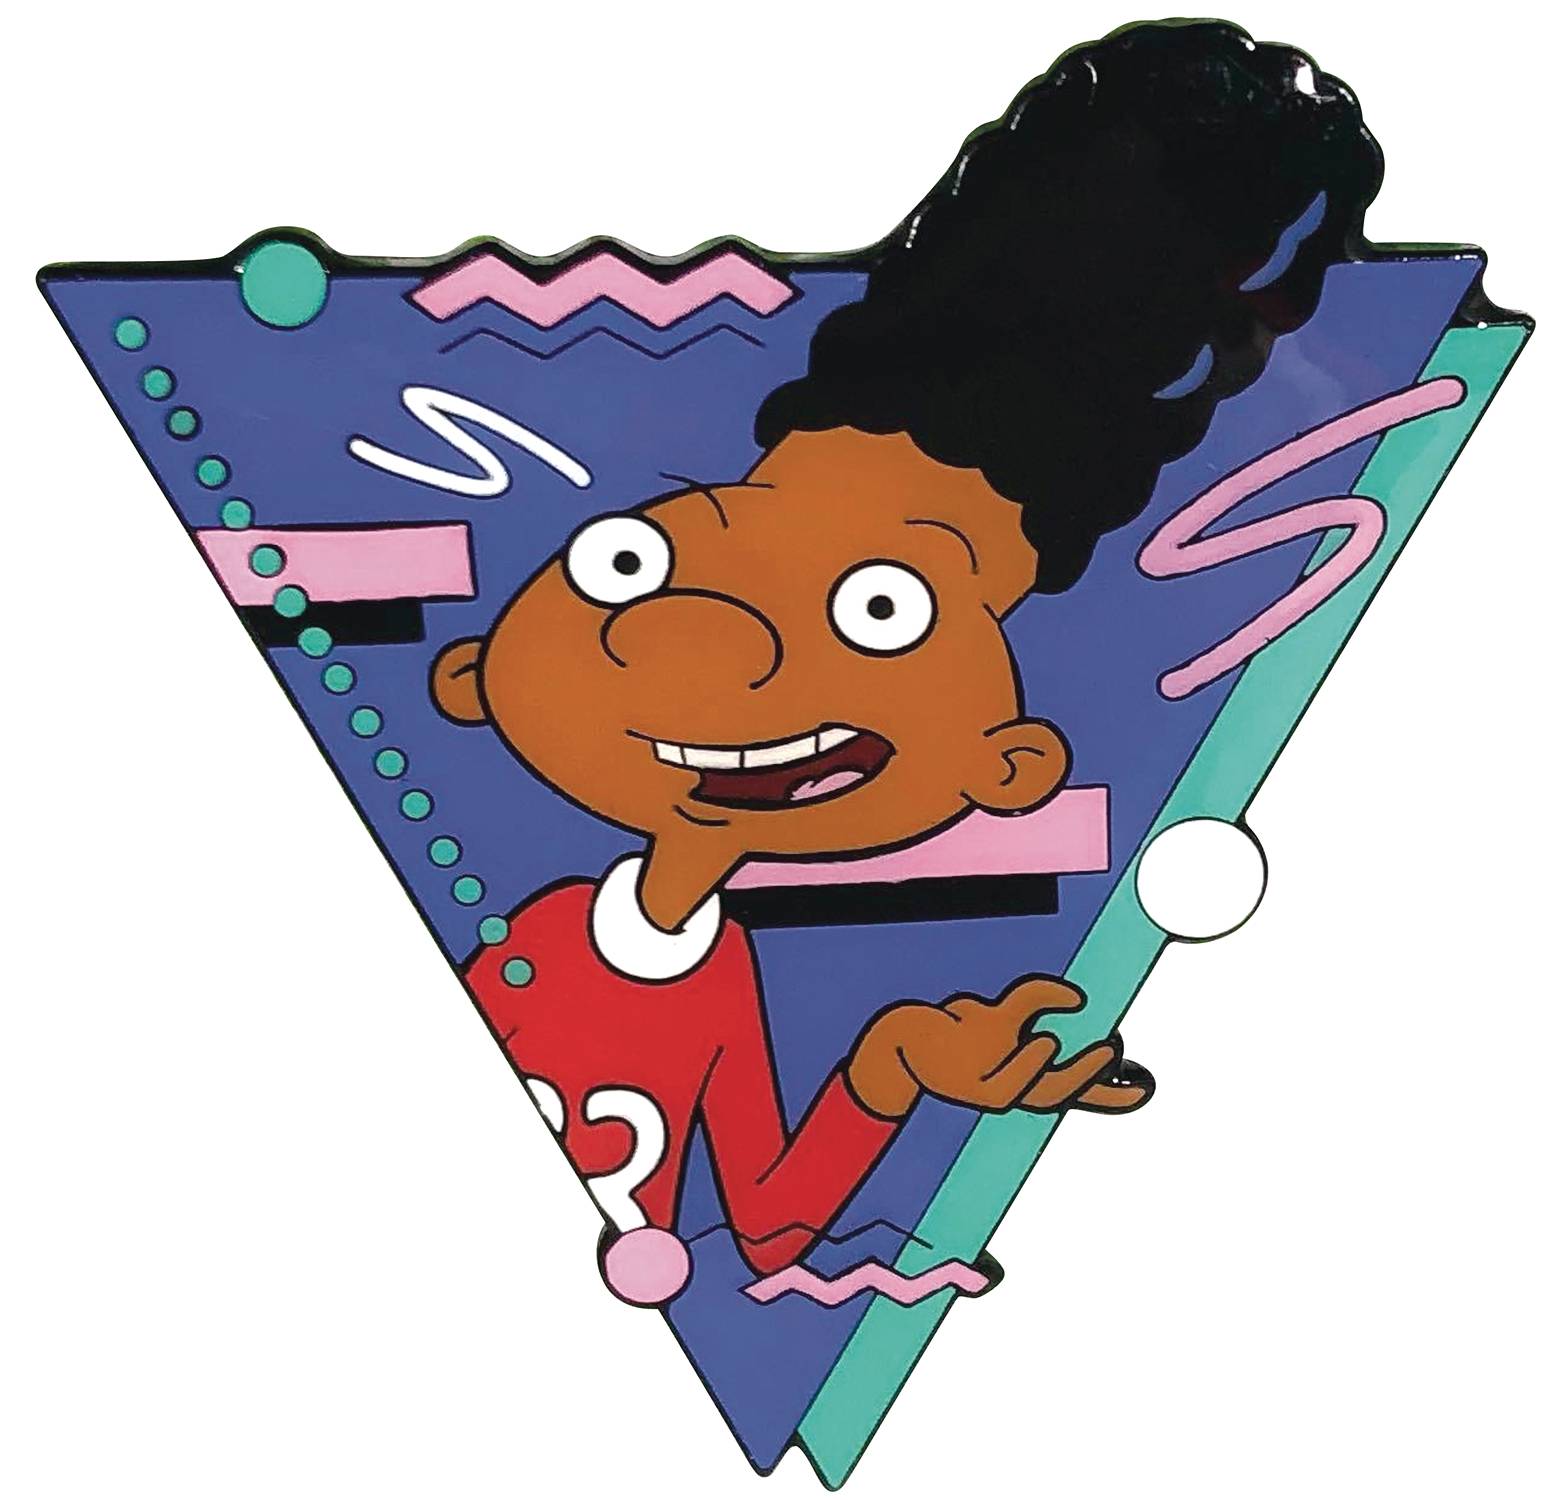 If you loved Hey Arnold, these pins of Arnold and Gerald features a 90s loo...